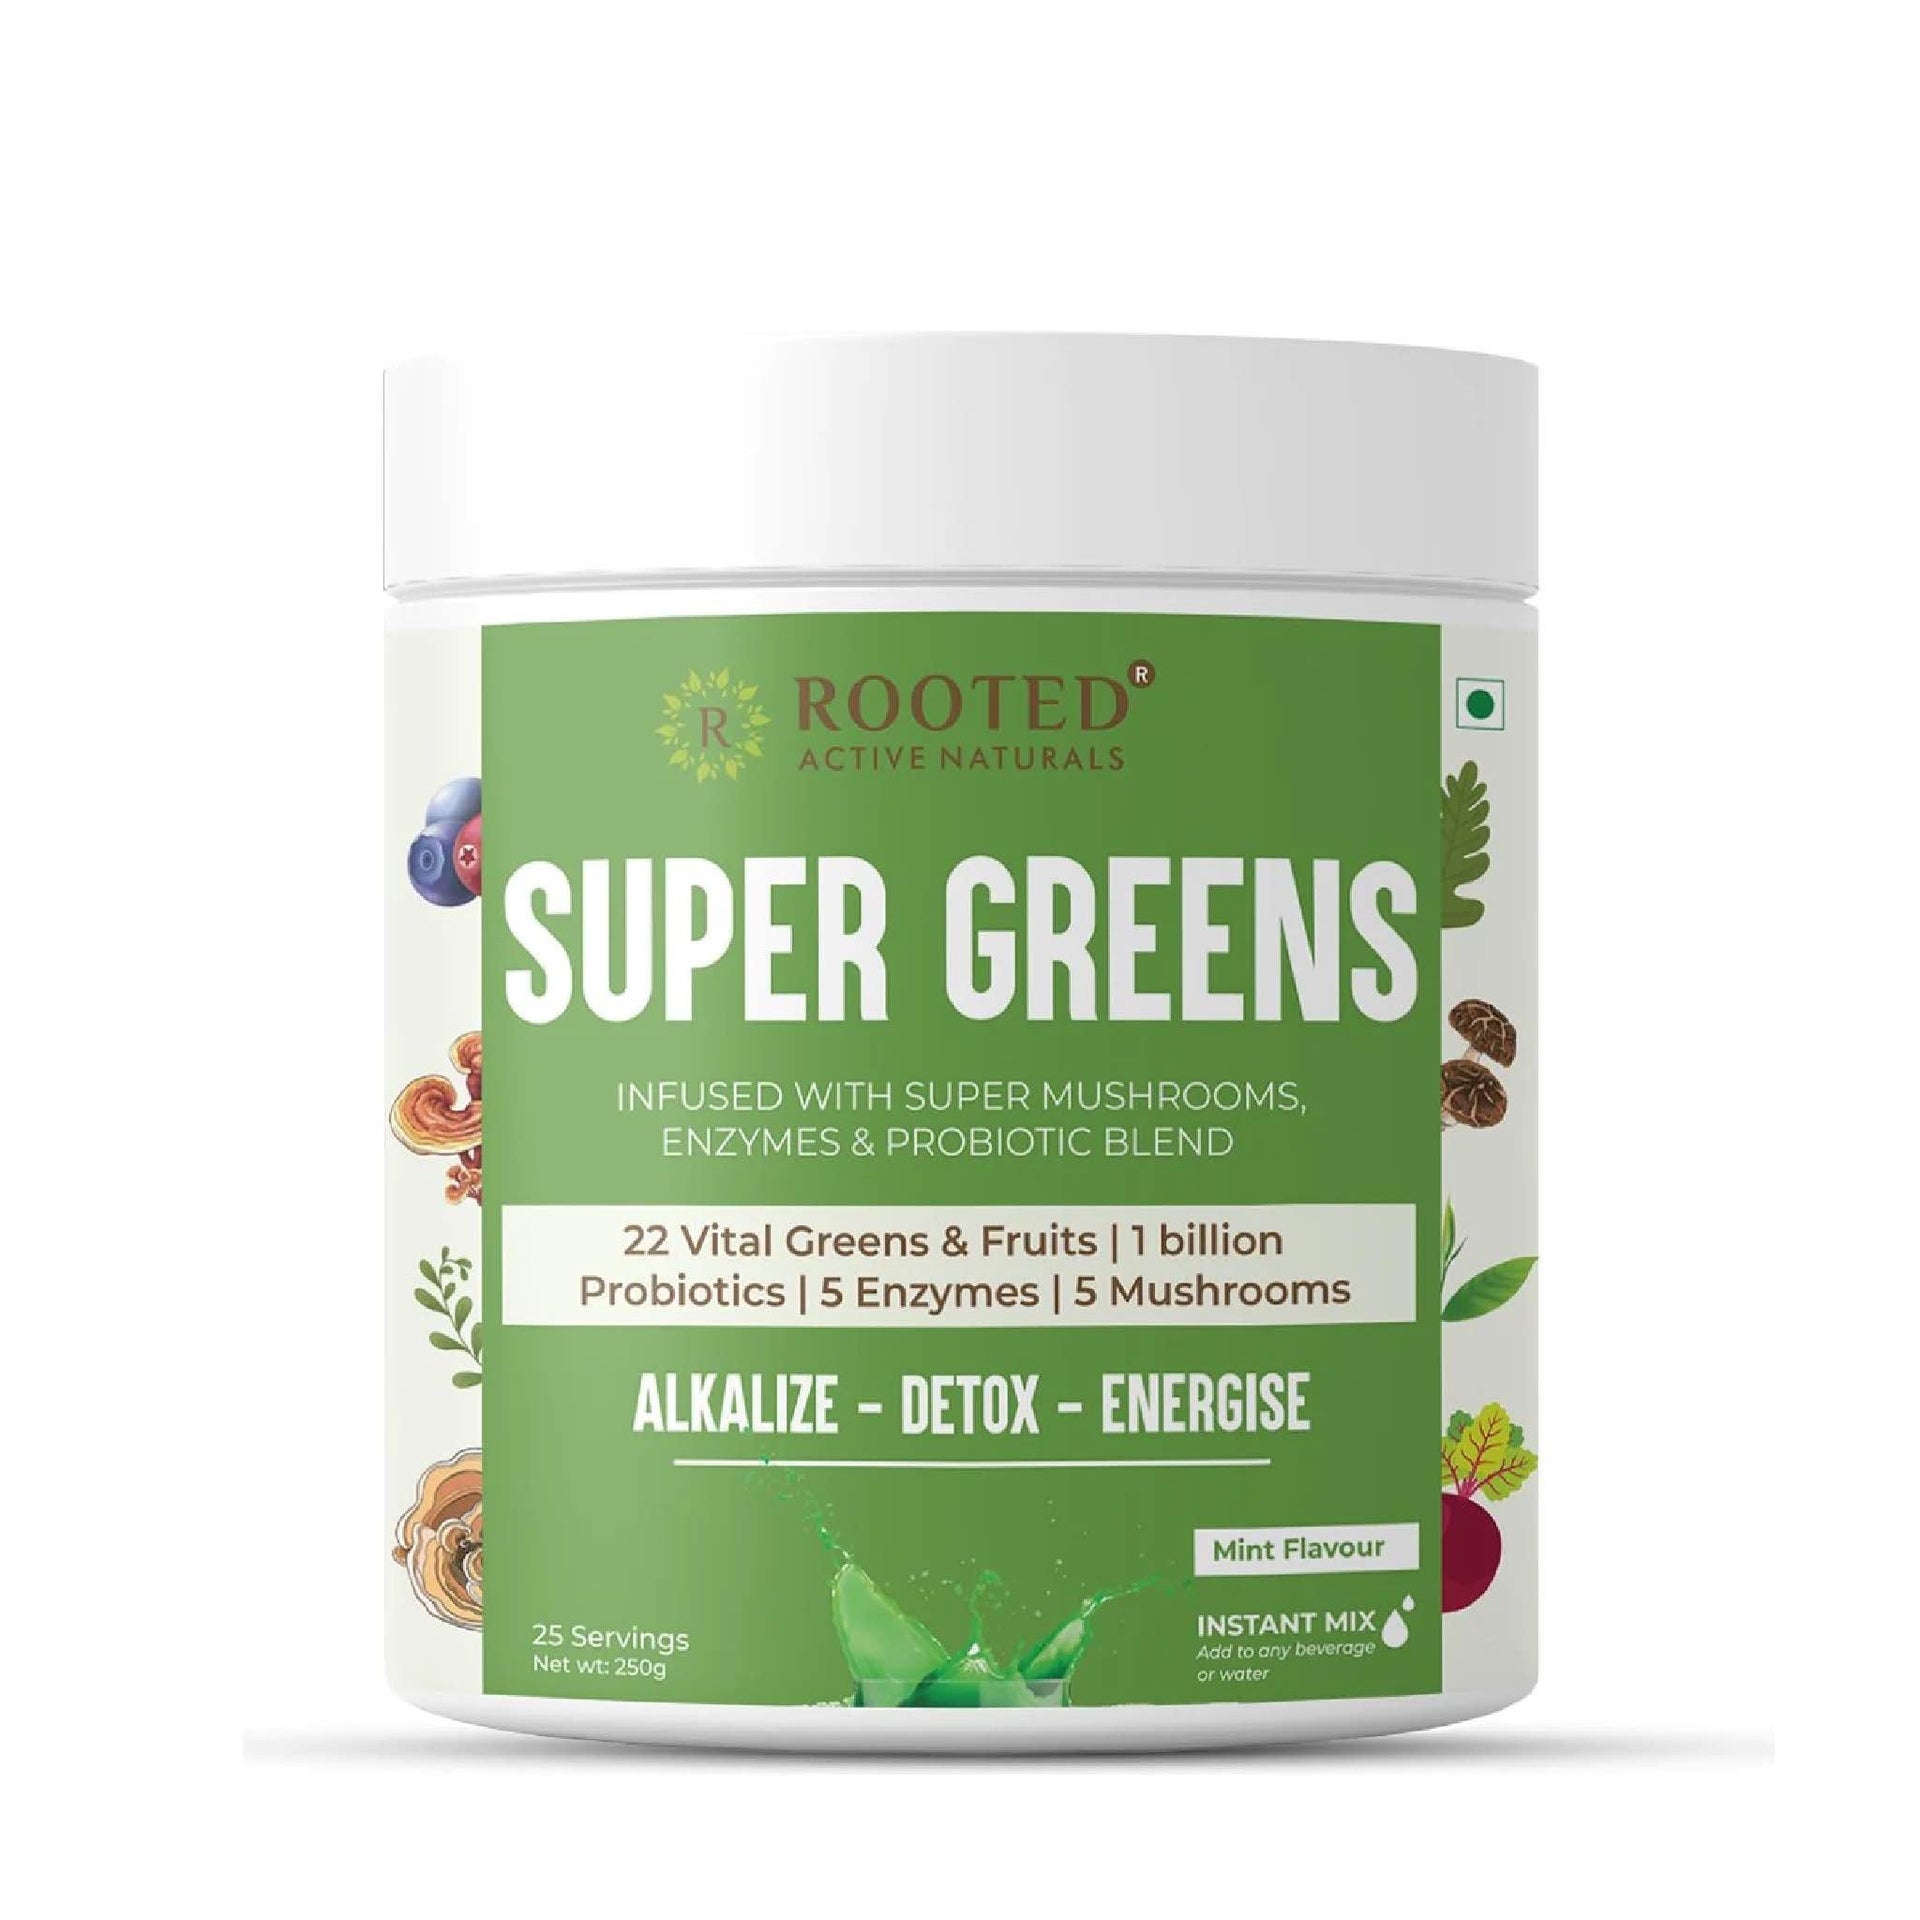 Rooted Superfood Greens, Mushrooms & Herbs blend | 22 Daily Greens & Fruits, 5 Mushrooms, Probiotics & Enzymes | Rich in vitamins, minerals, iron, fiber & antioxidants | 250 grams - CBD Store India